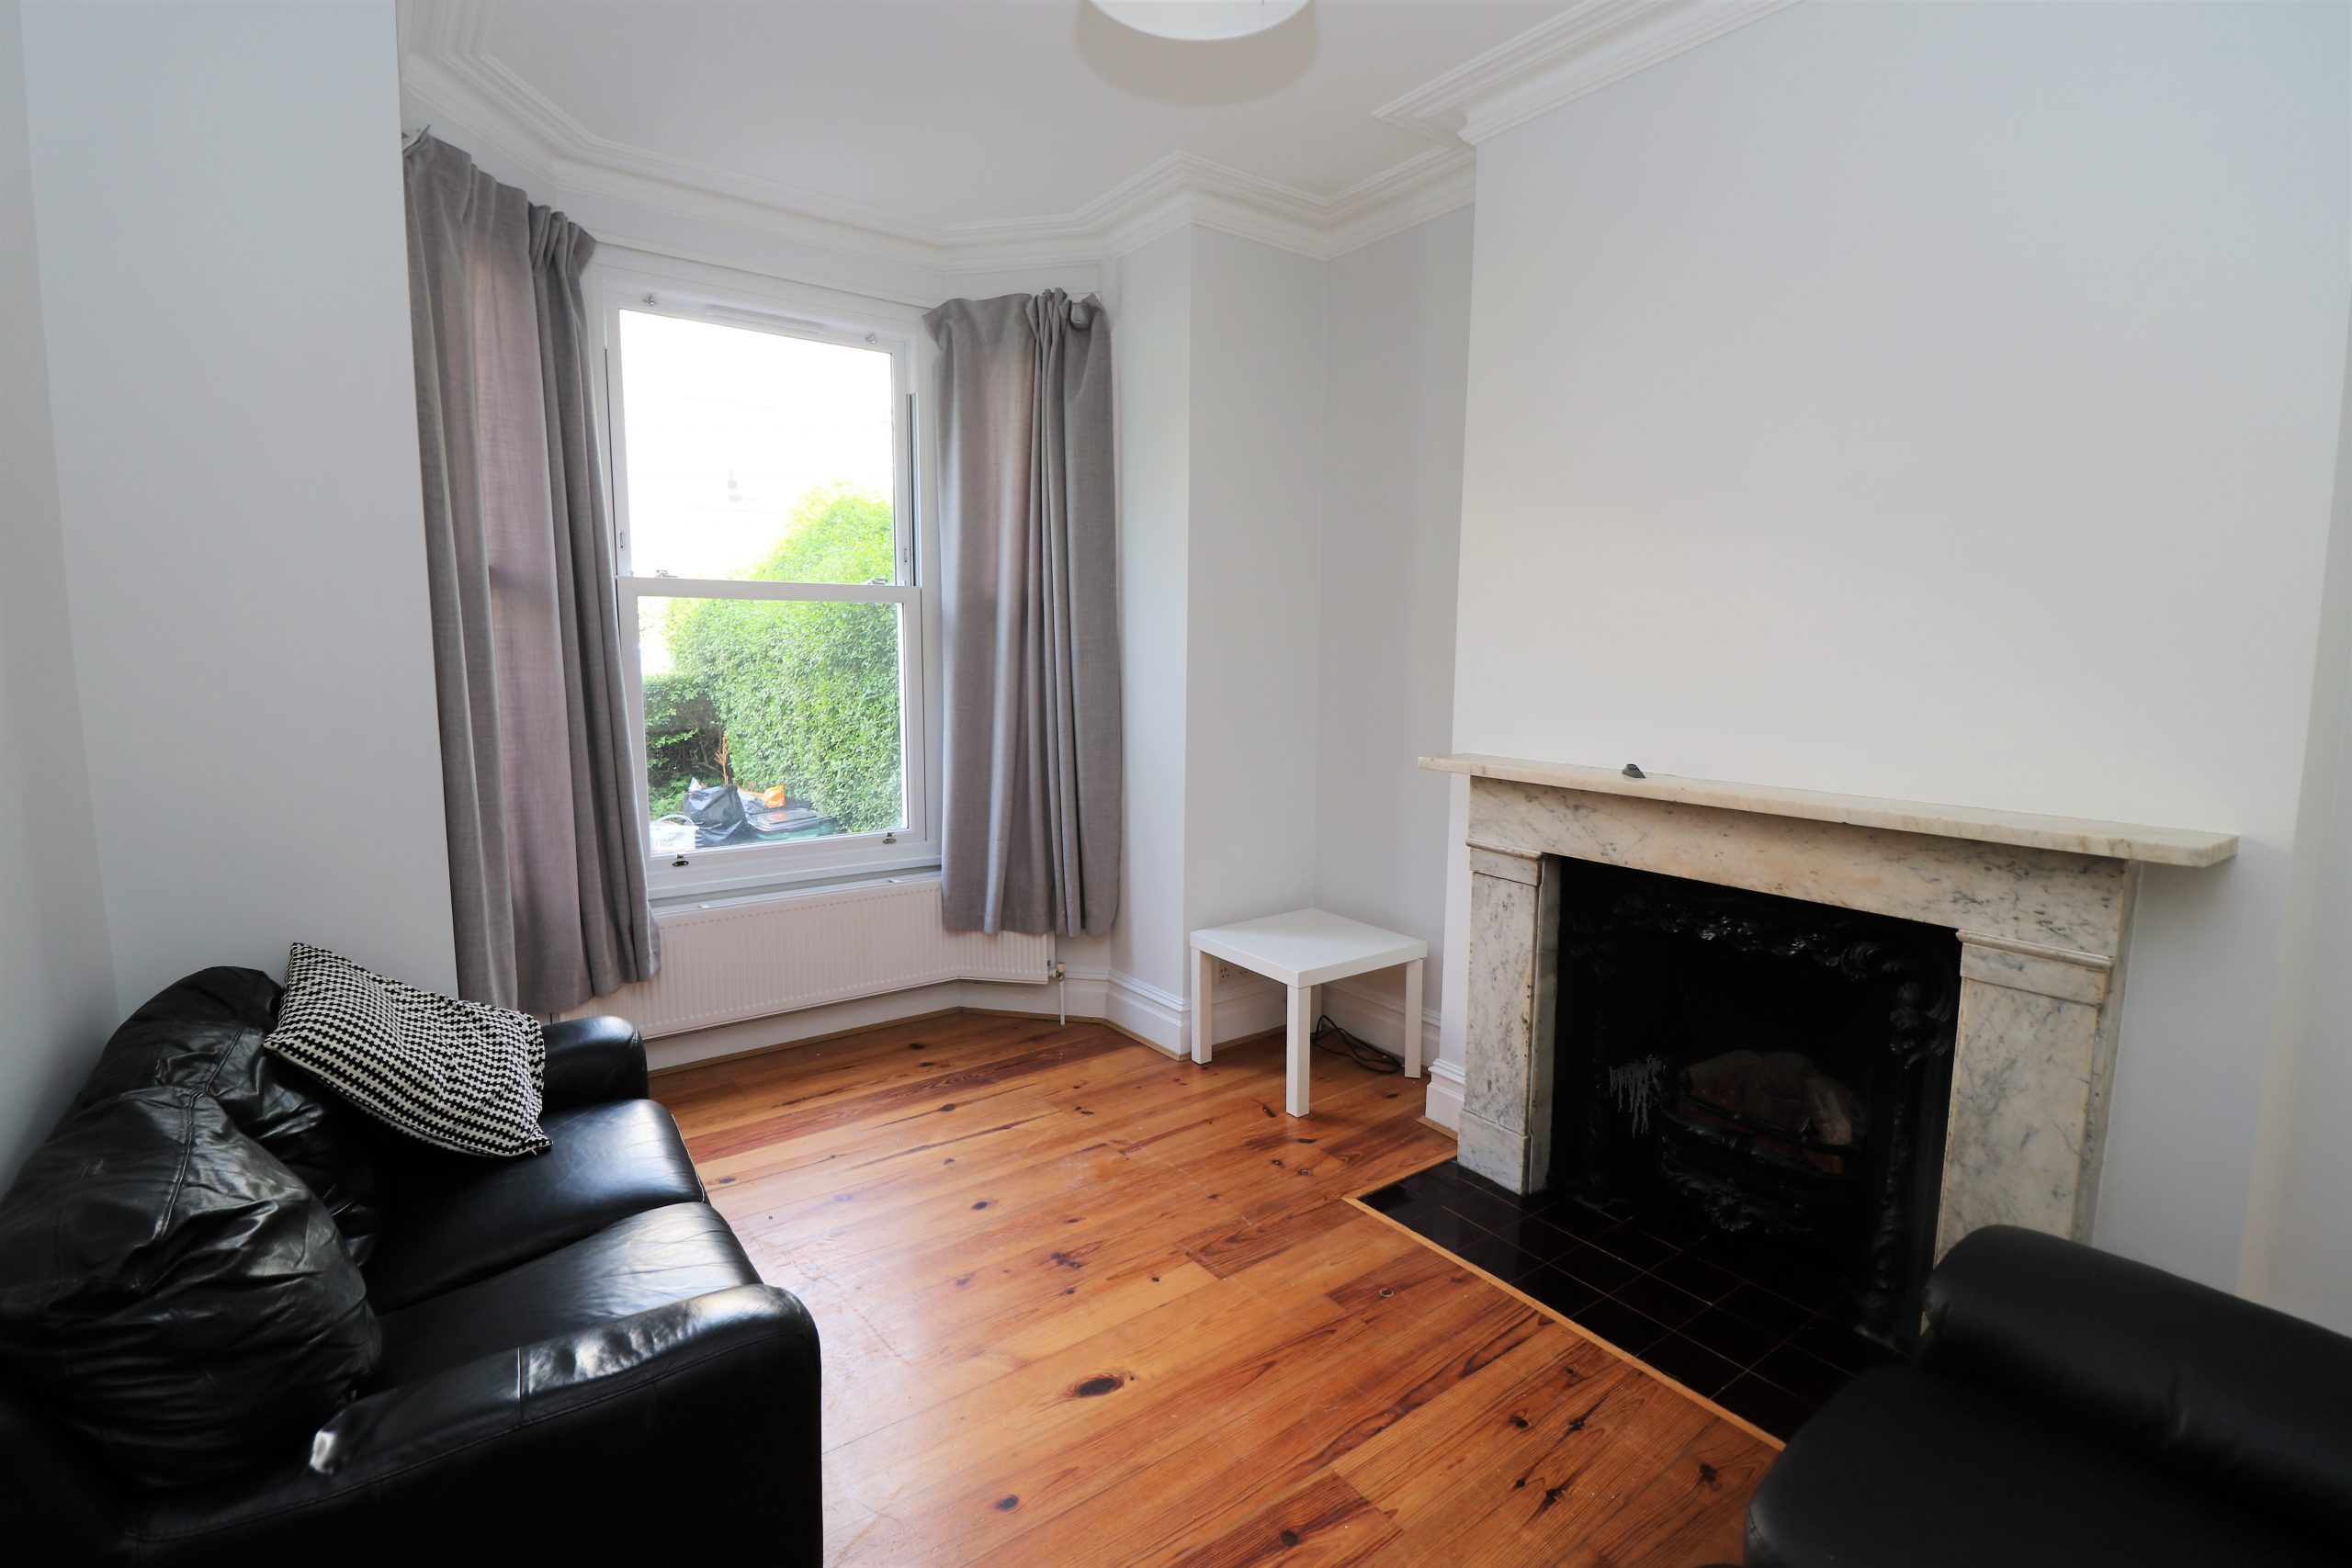 Newly decorated 3/4 mid terraced bedroom house located on a quiet street in Archway/Holloway, N19/N6